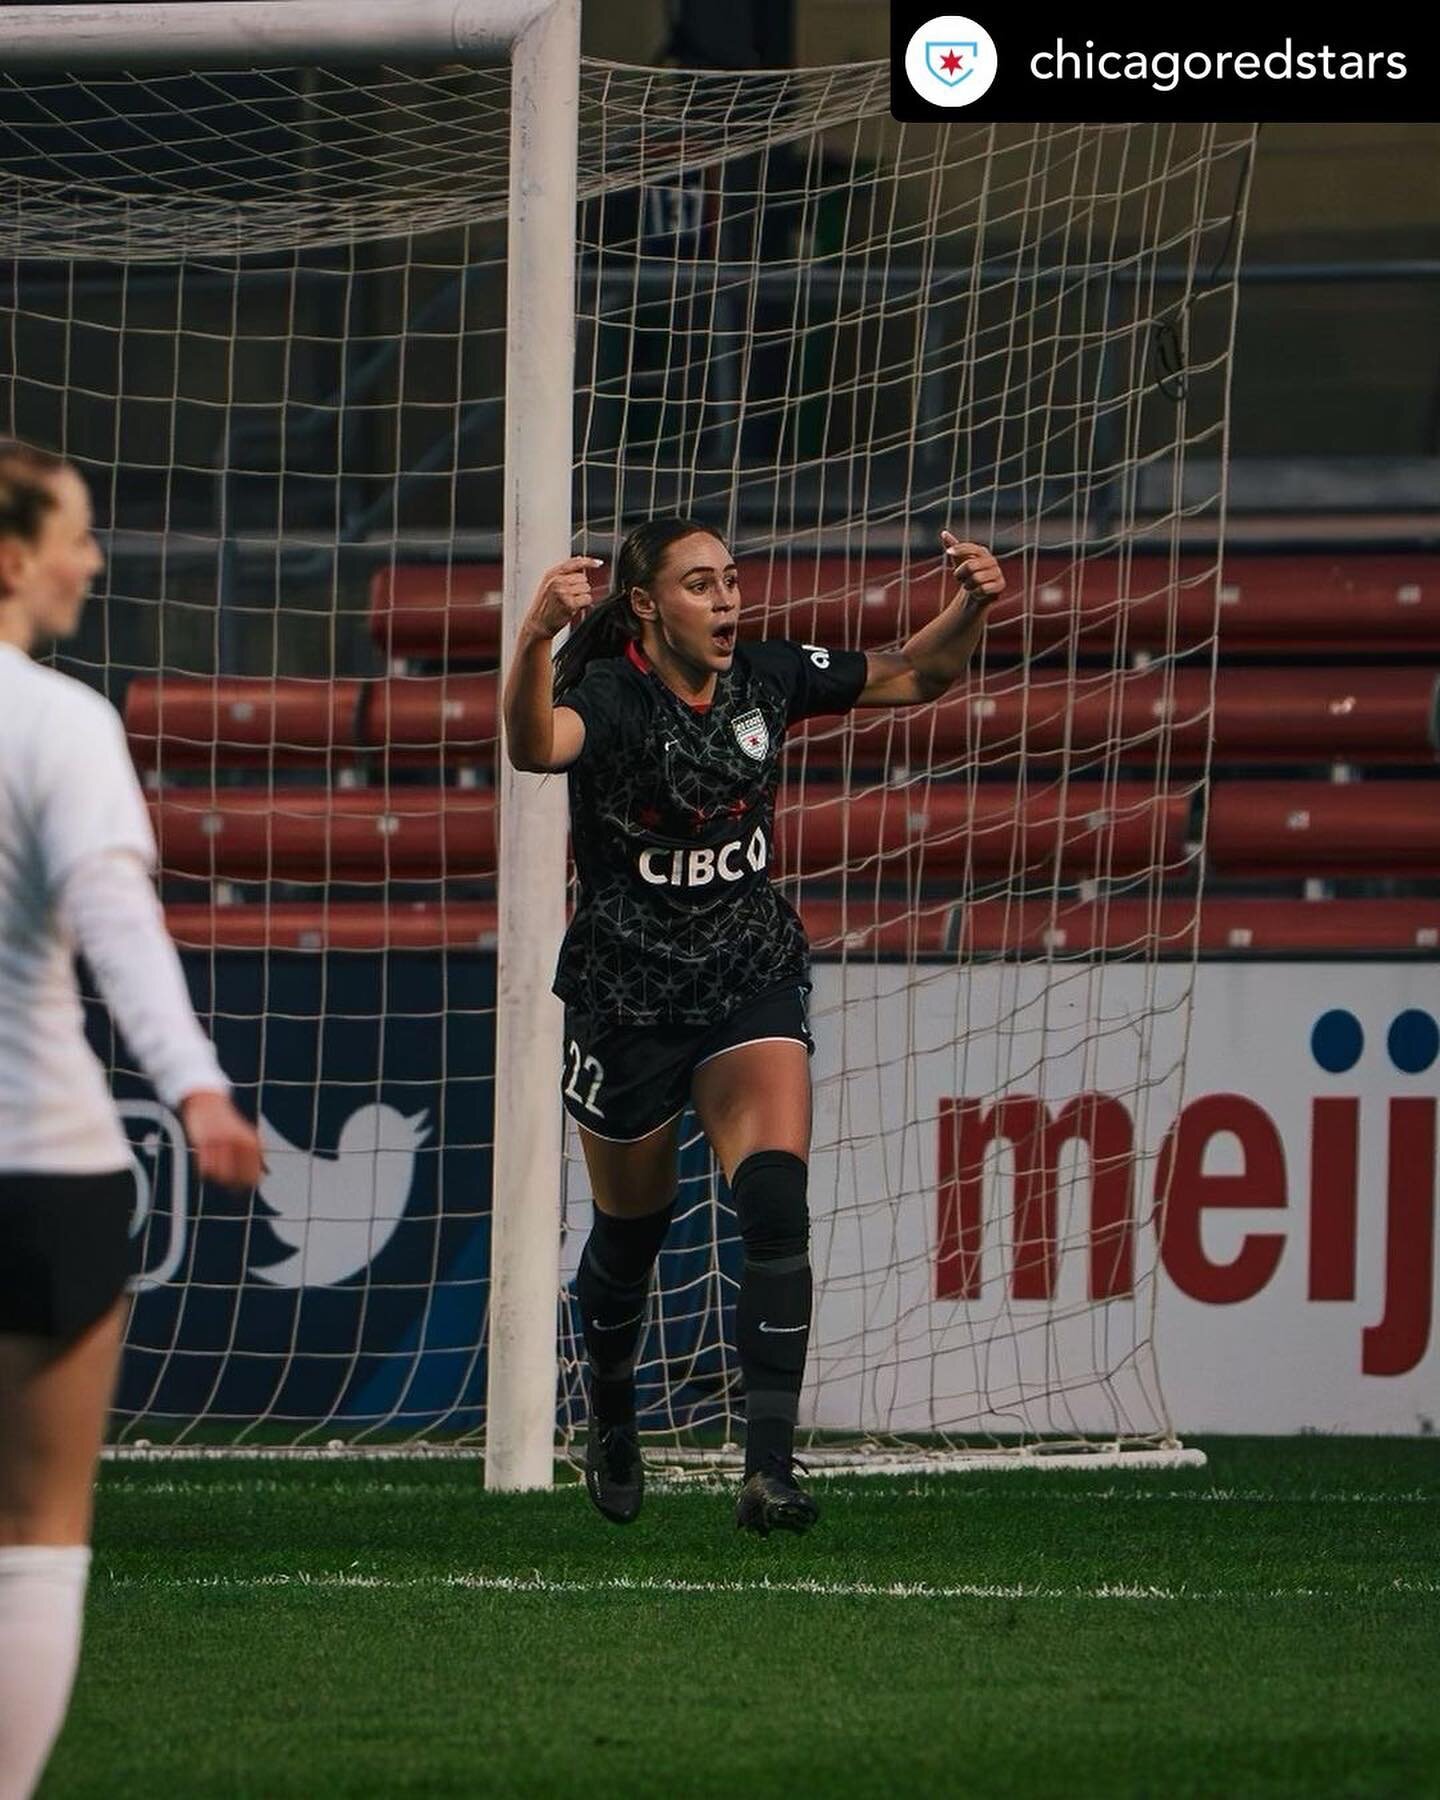 Big night in the NWSL yesterday. Two Canadian goals to secure important points for their teams.

LFG @biancastgeorges who also picked up the POTM award

✈️ @jordynhuitema rises higher than anyone to score the 90th minute tying goal

Not too shabby 

